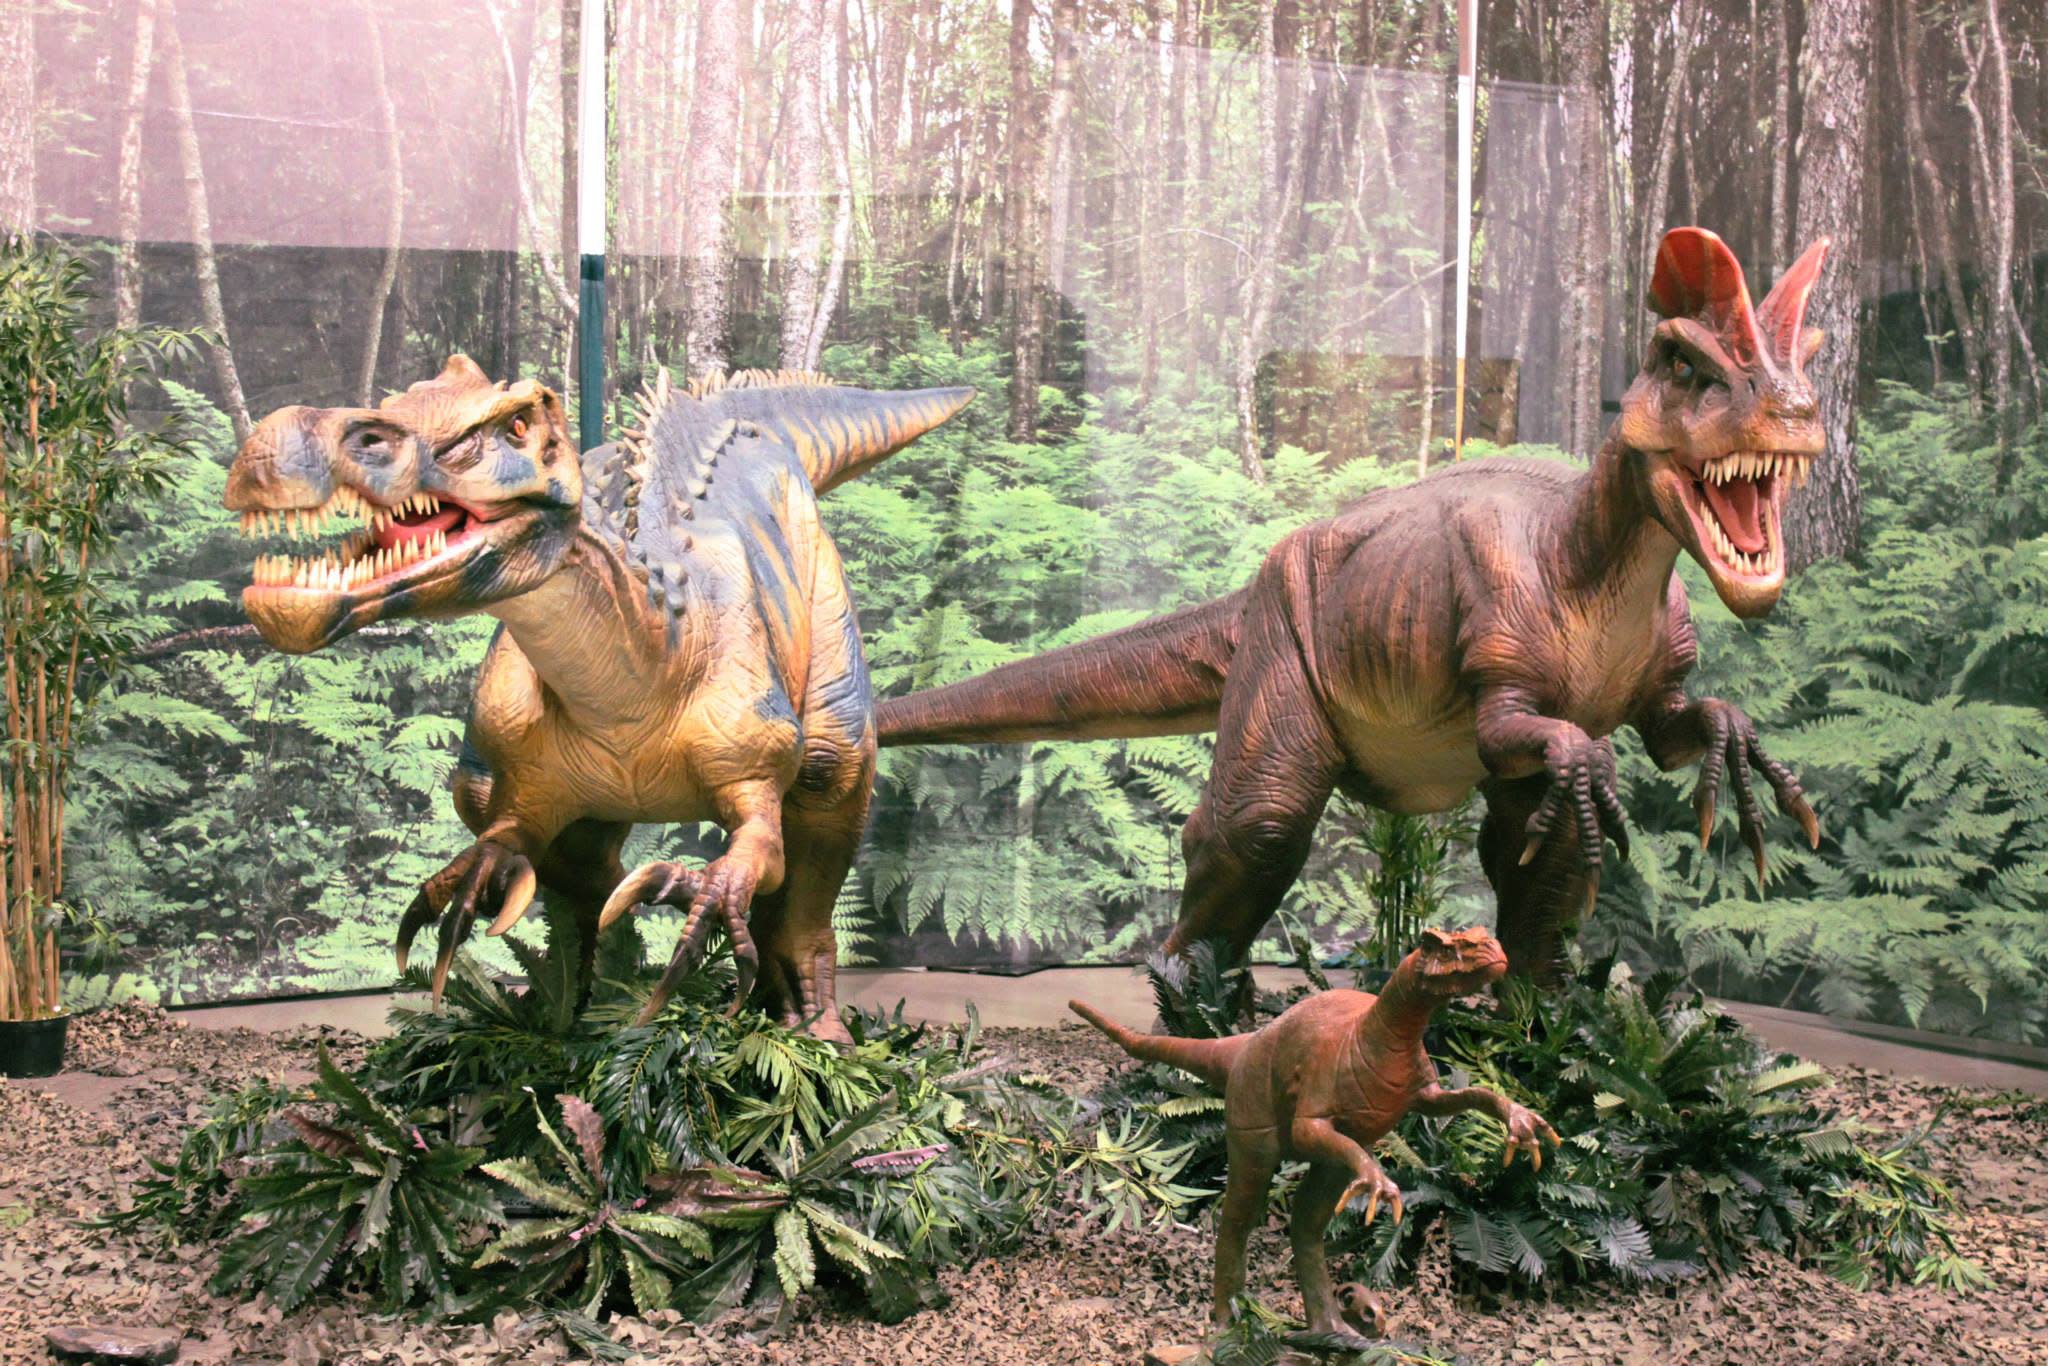 Discover the Dinosaurs is a sprawling exhibit of dinosaurs, fun and more at the Columbia Metropolitan Convention Center July 4-6, 2014.